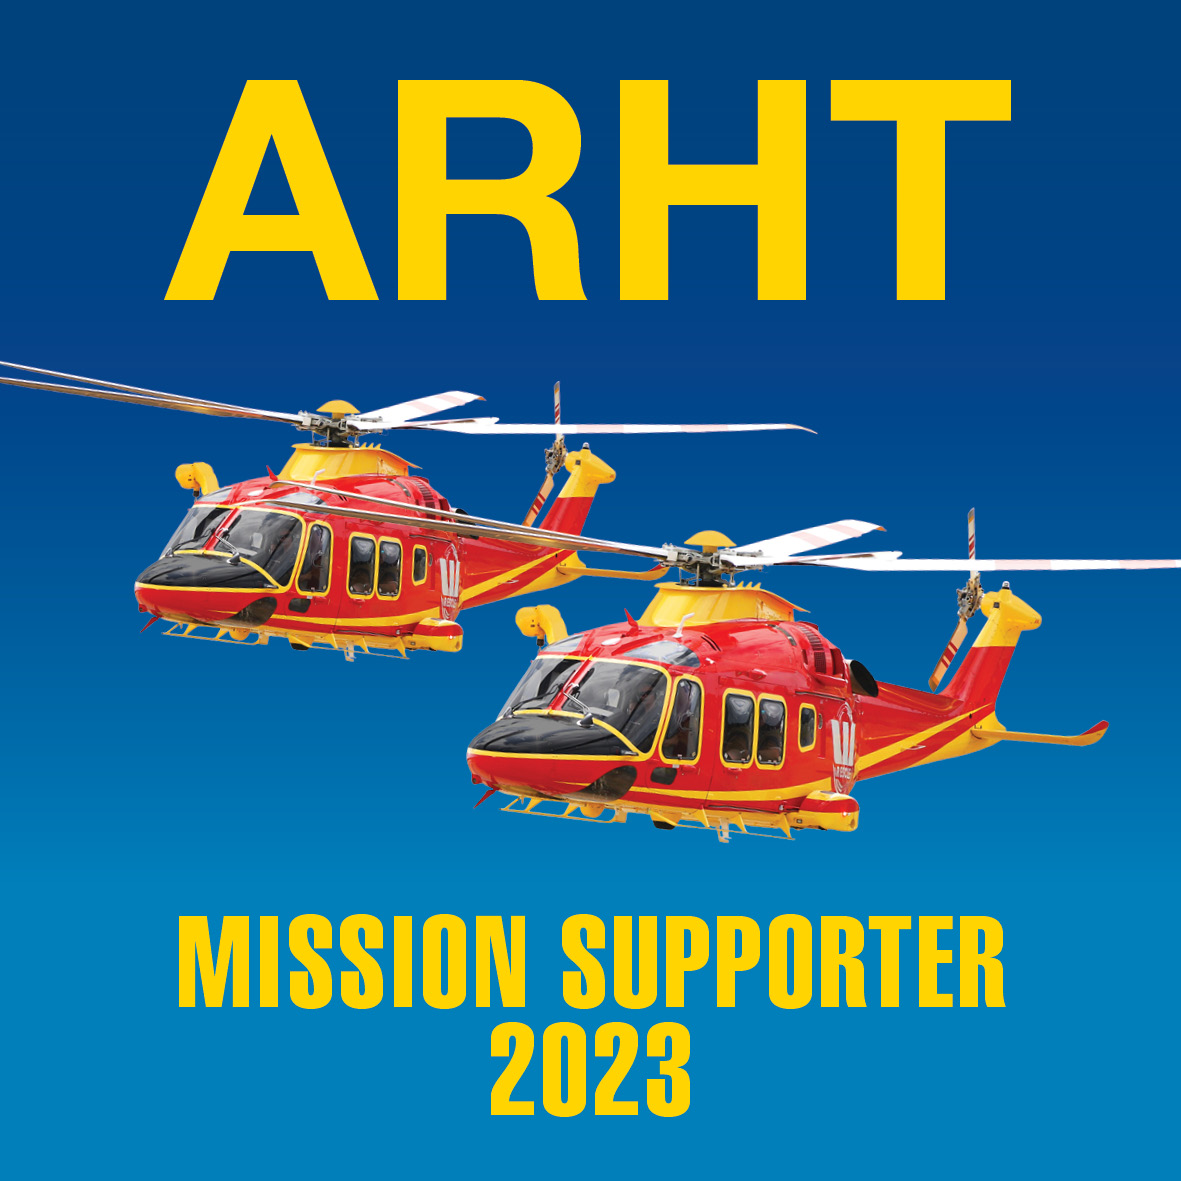 HG Leach is an ARHT Mission Supporter 2023